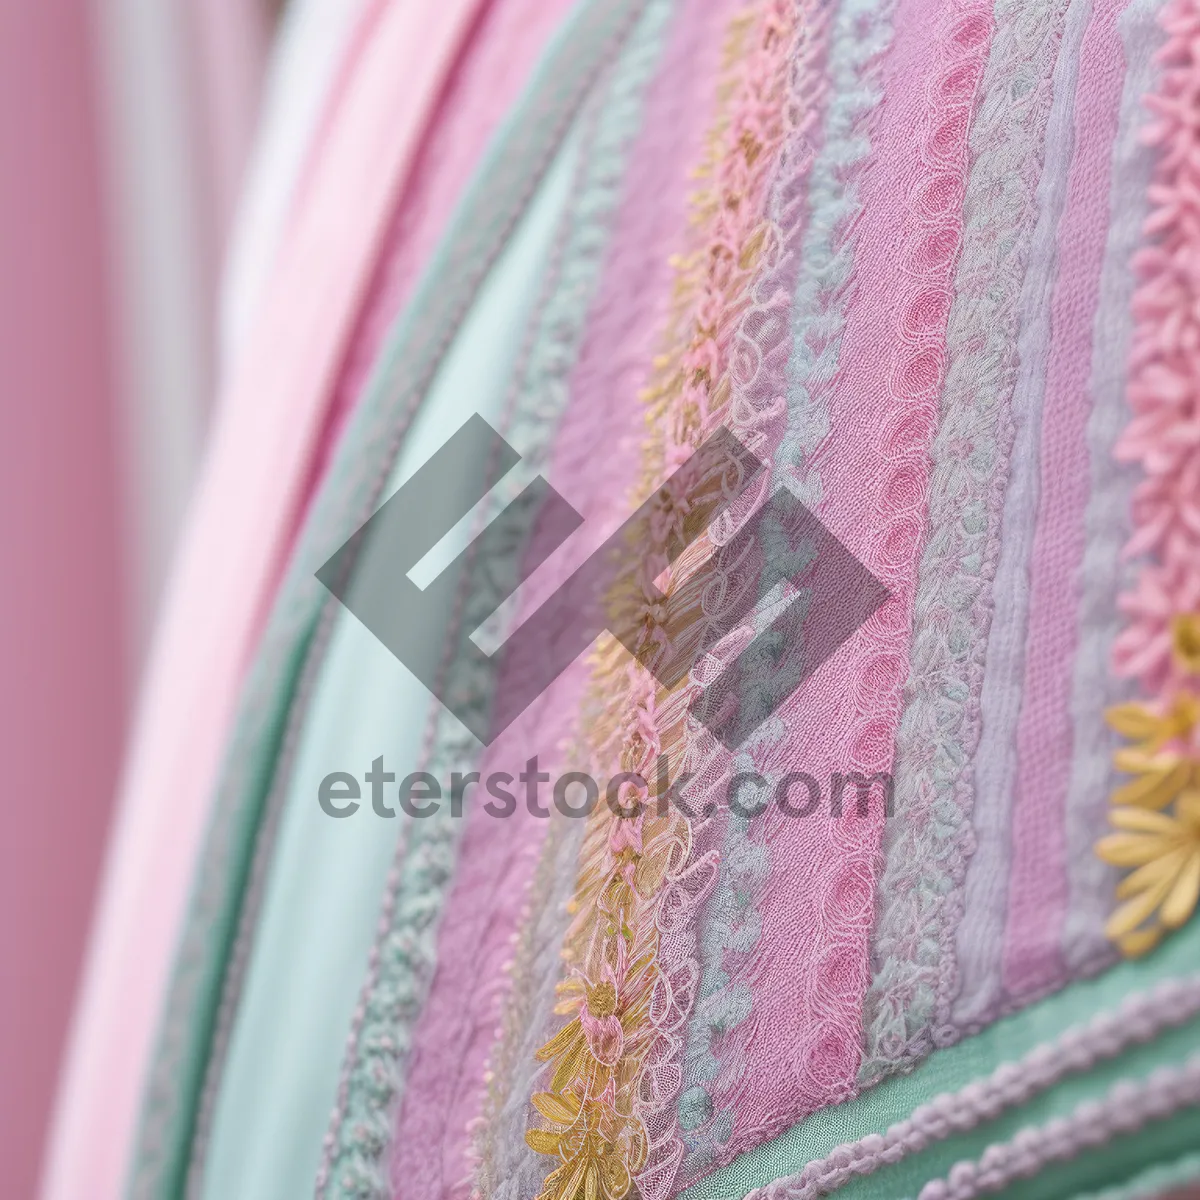 Picture of Colorful textile slide fastener pattern on silk fabric